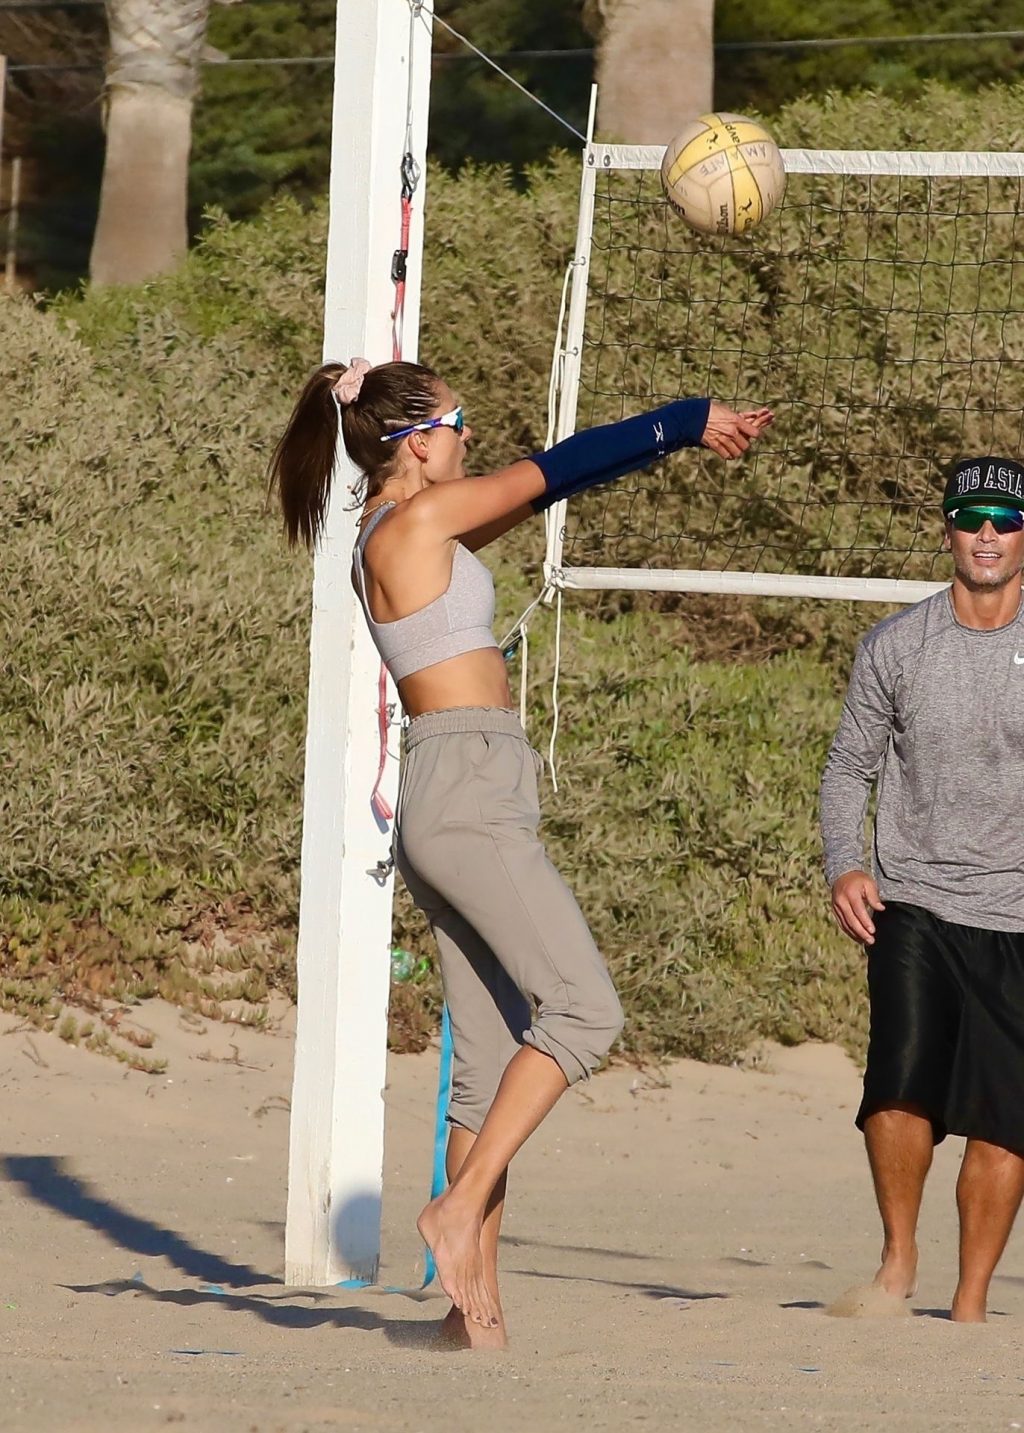 Alessandra Ambrosio Puts in Work on the Sand (132 Photos)